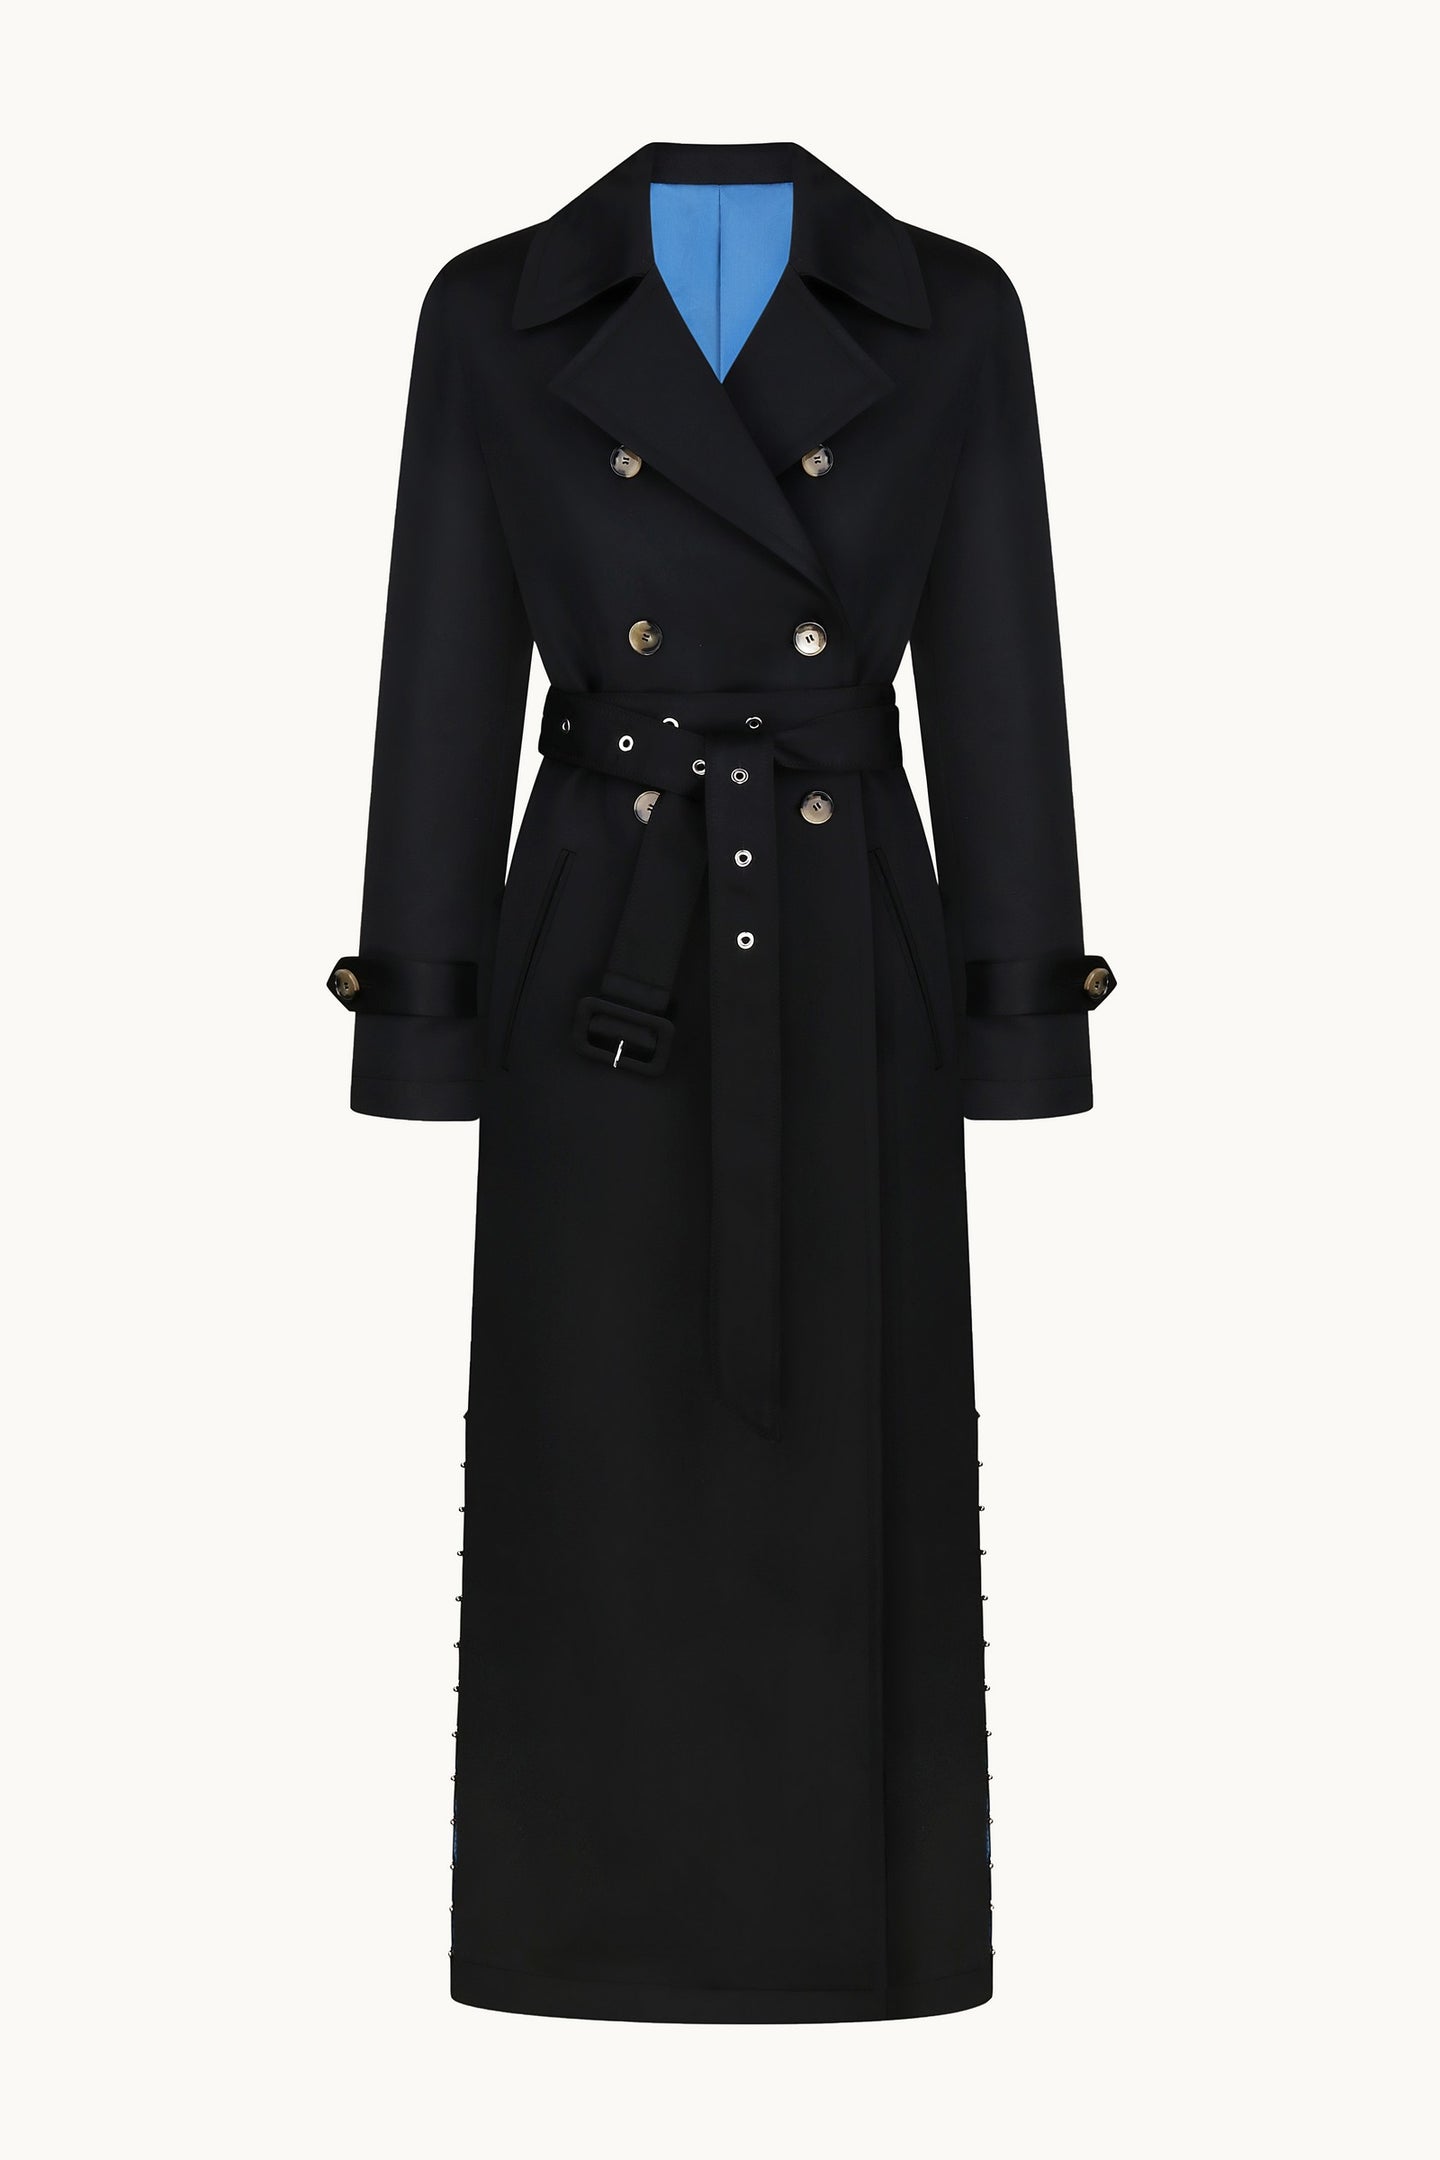 Hannah black trench front view